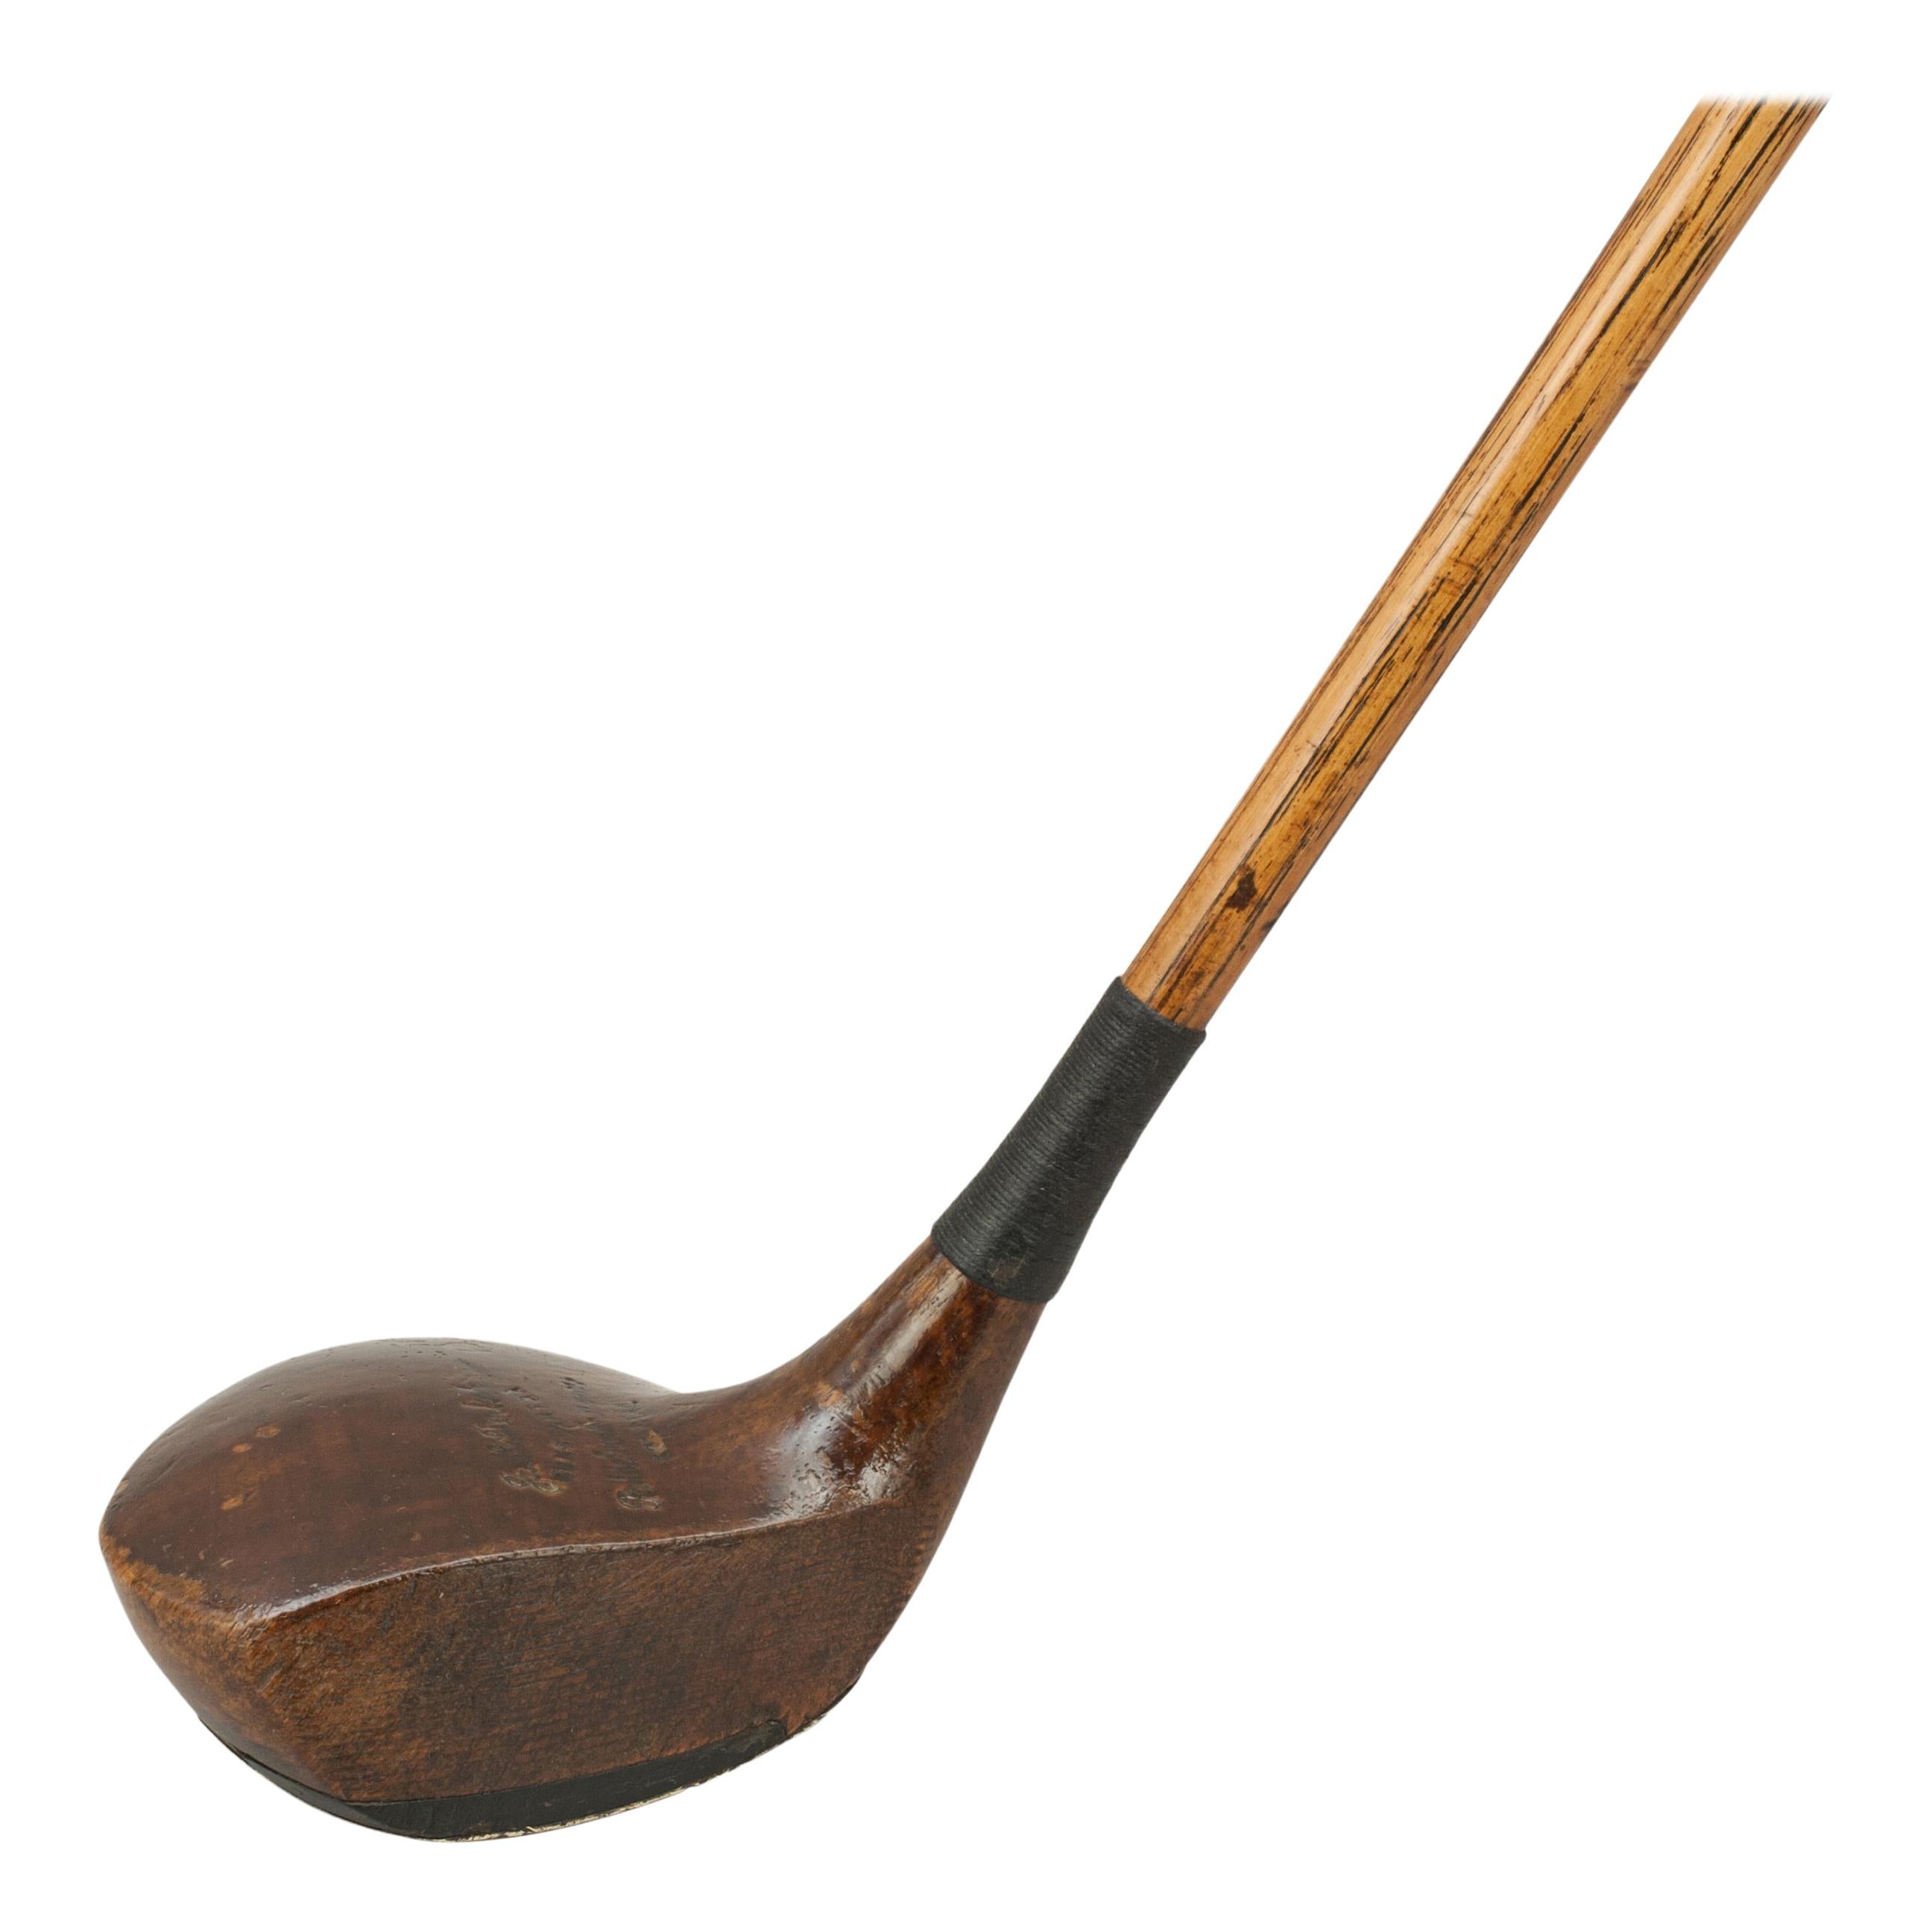 Vintage Golf Club, Hickory and Persimmon Brassie, Spoon